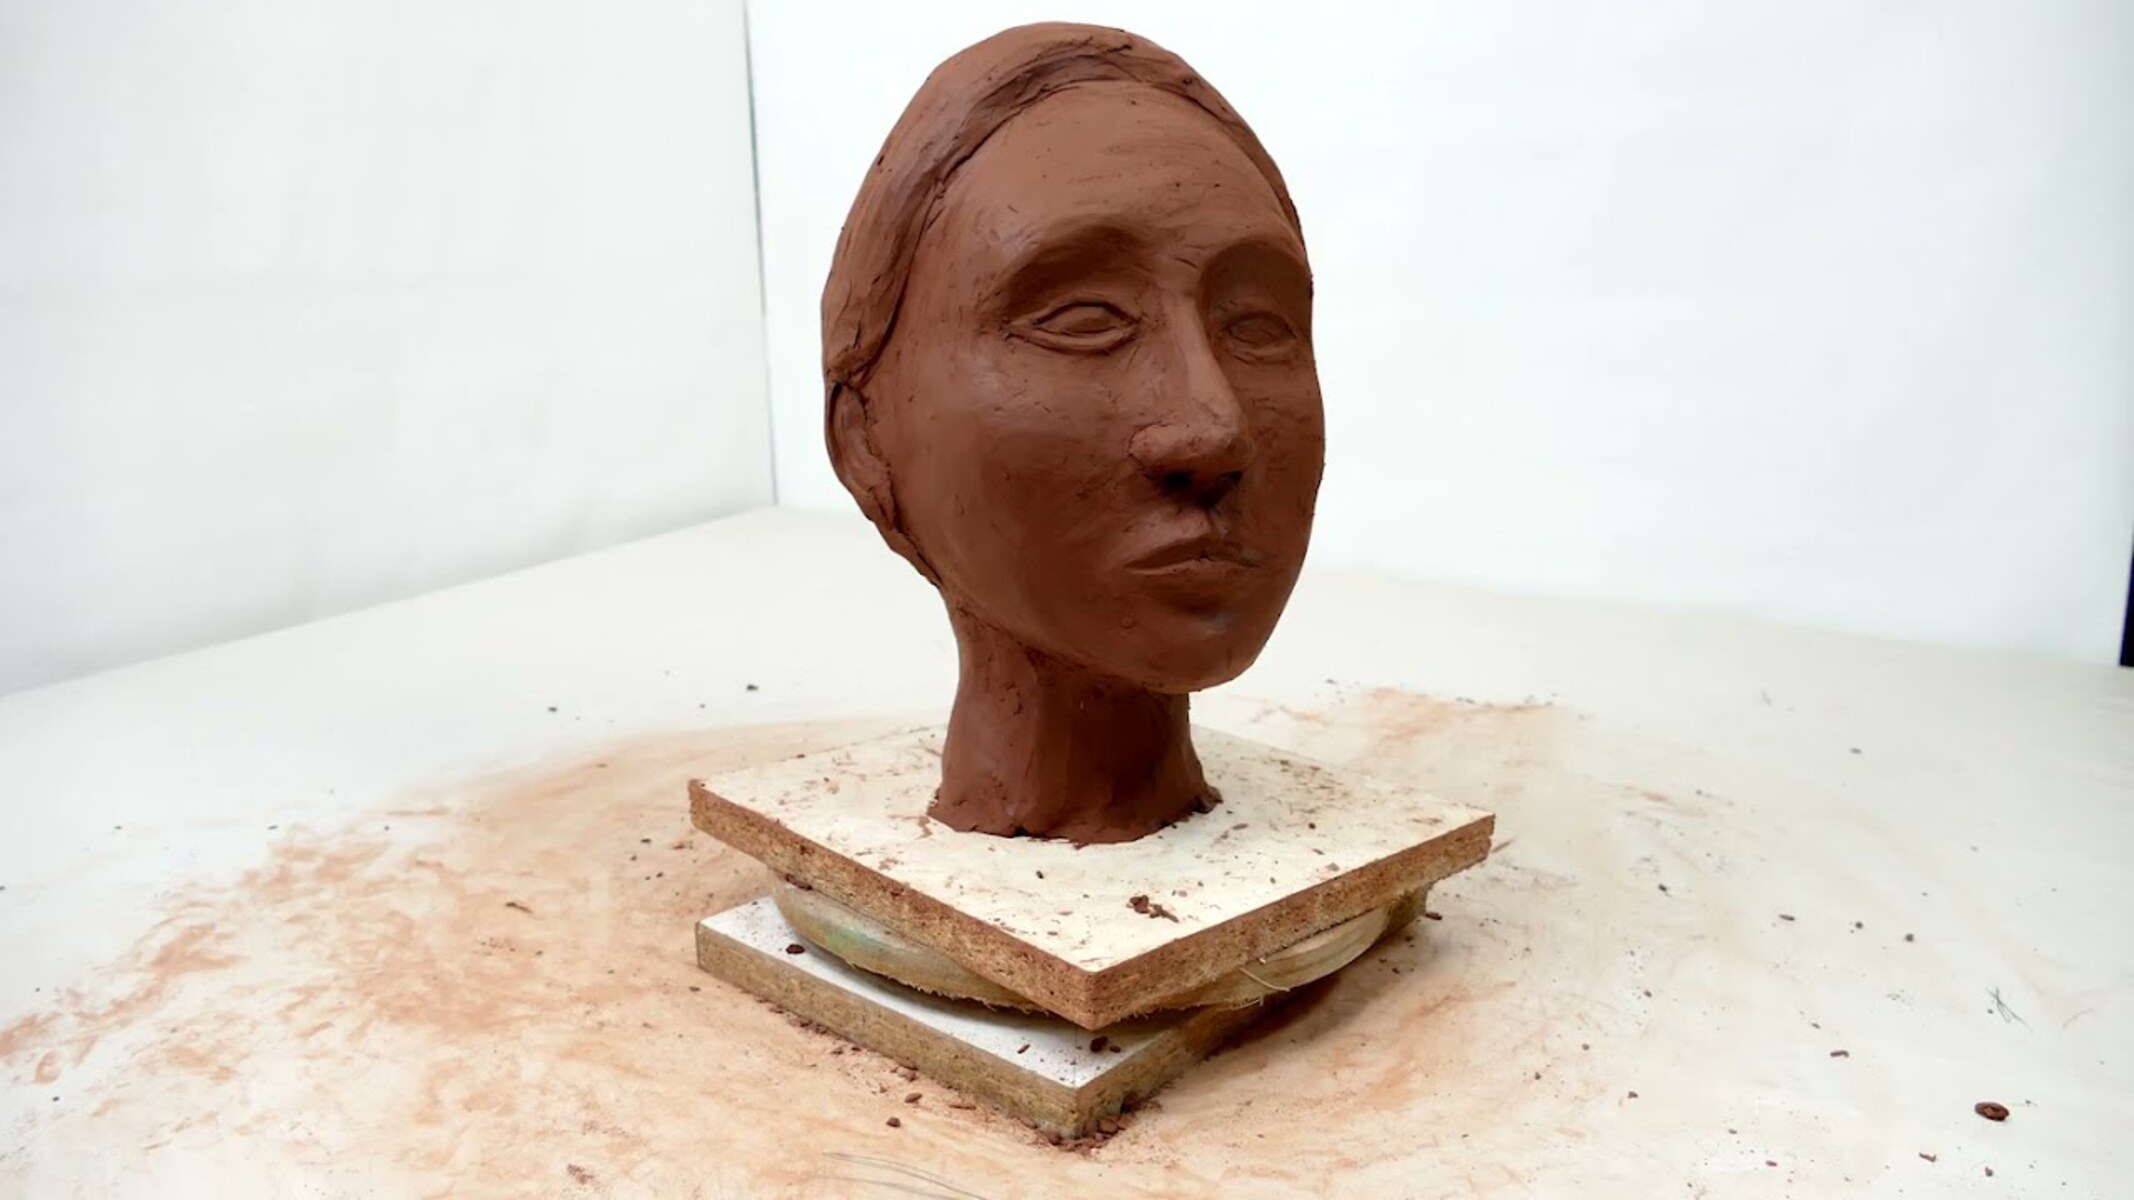 How To Make A Head Sculpture